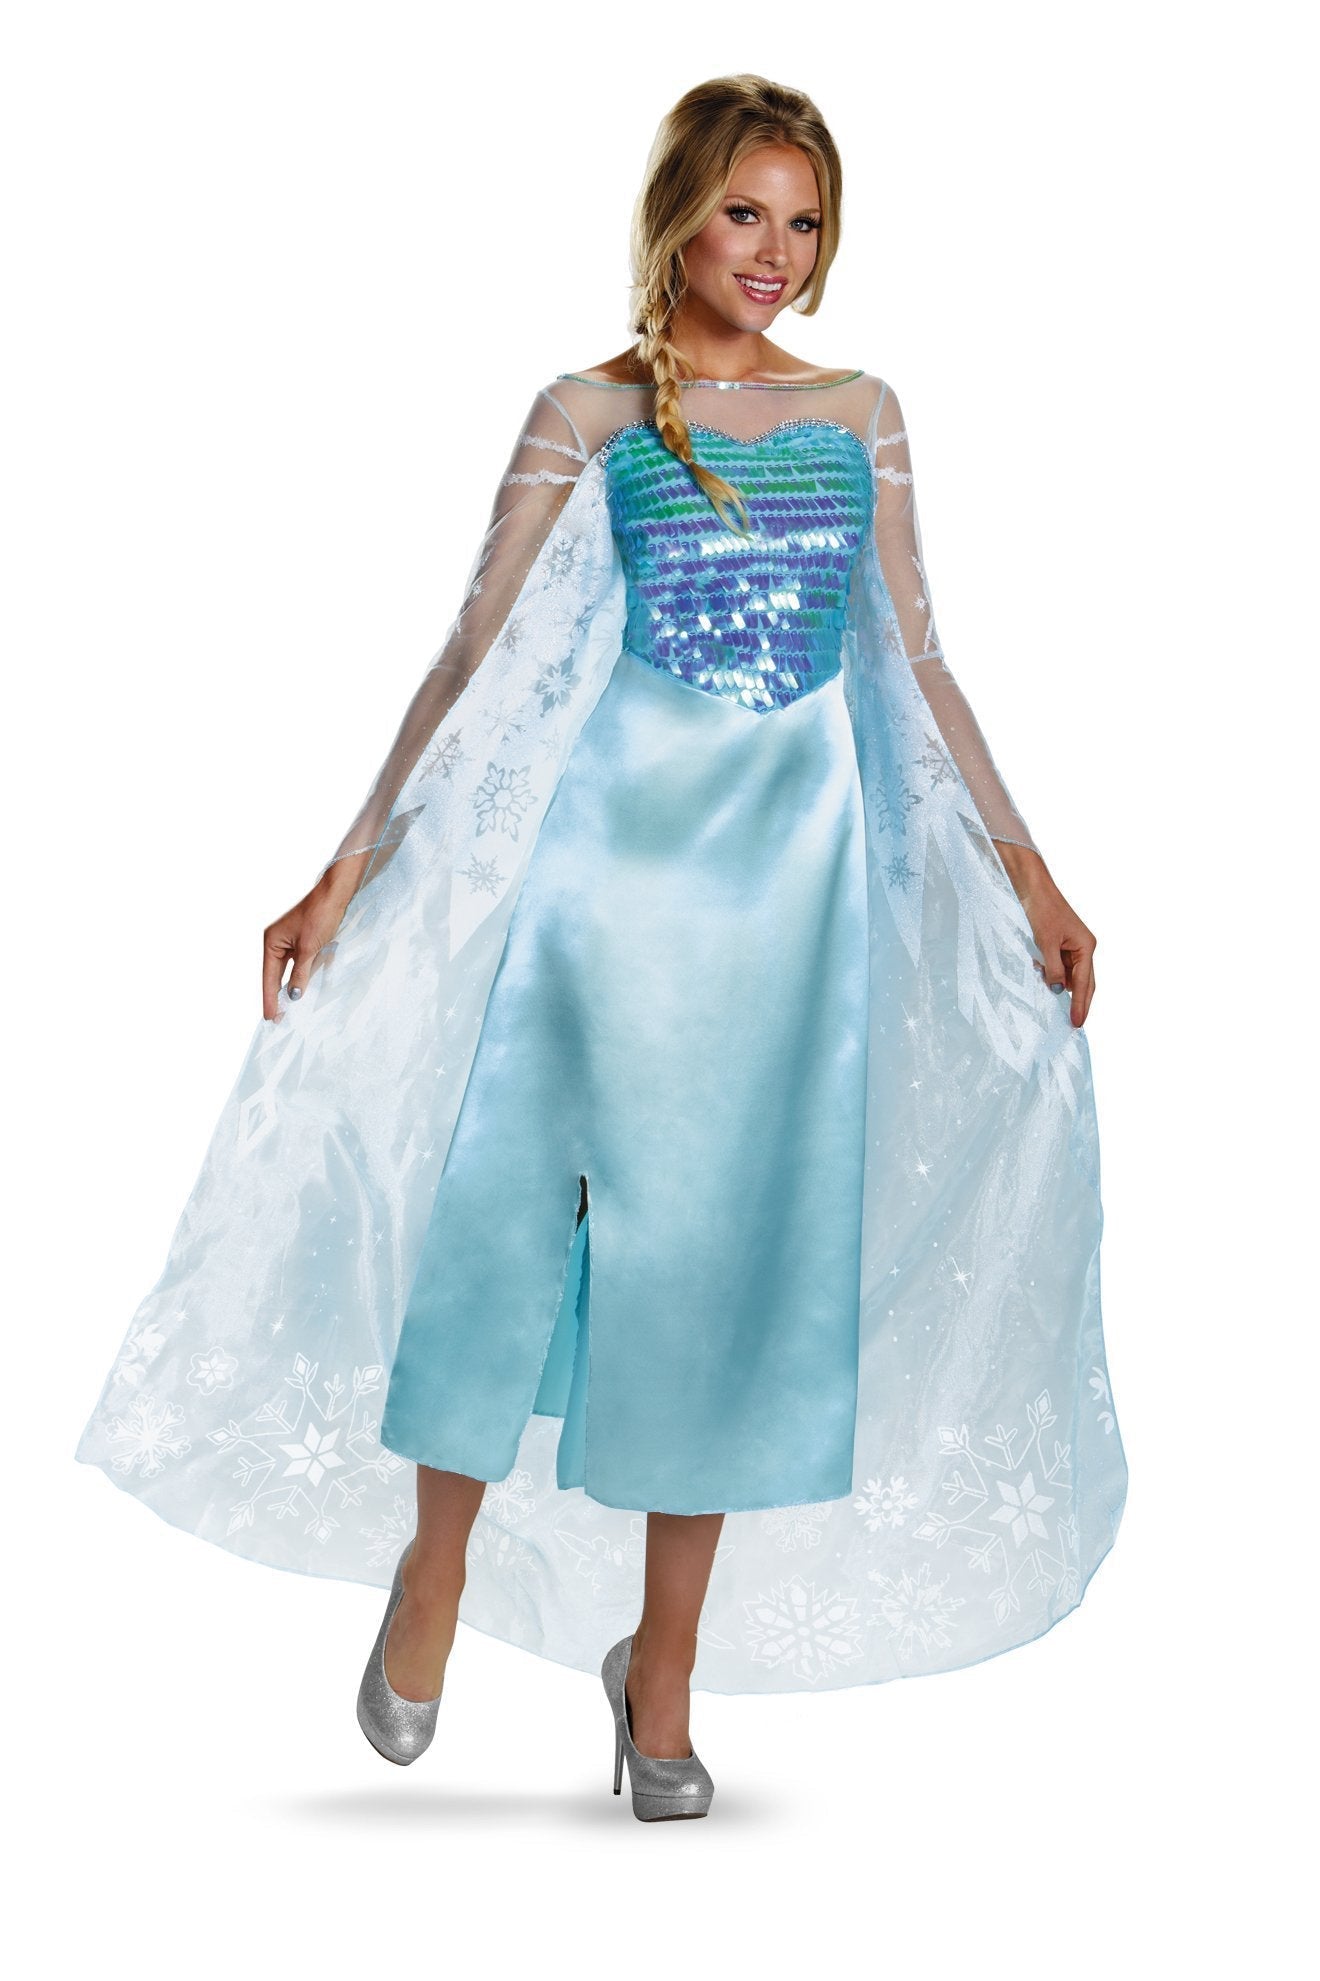 Elsa Adult Deluxe Costume DIS-82832 LARGE 12-14 - JJ's Party House